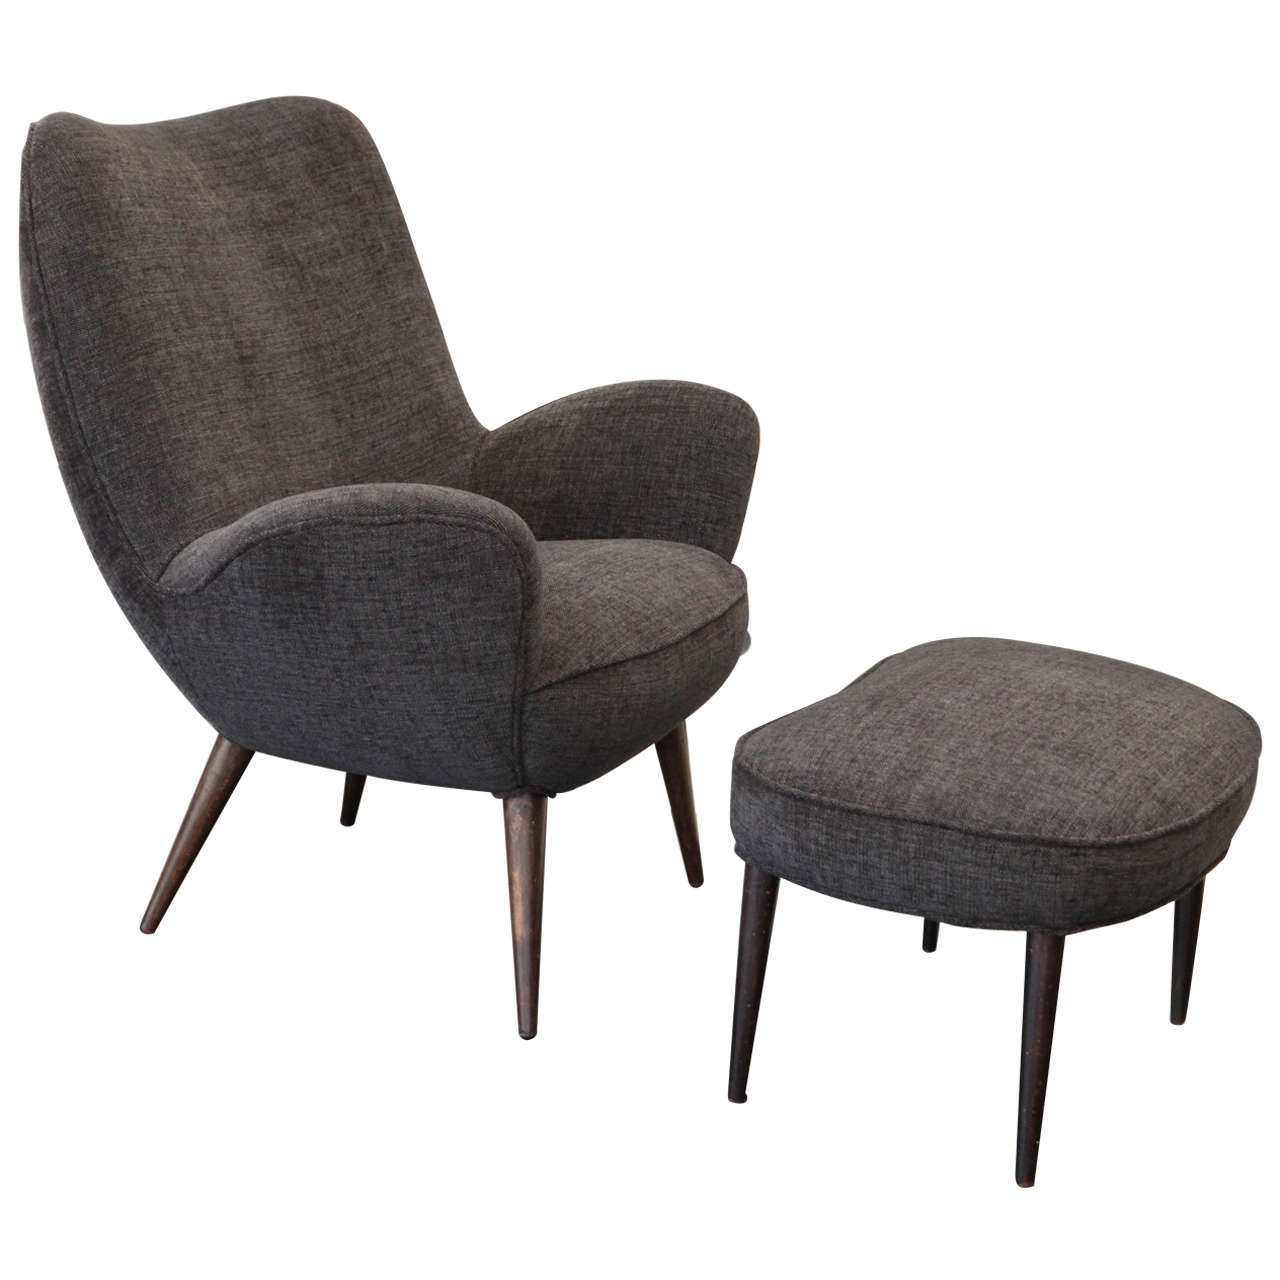 Italian 1950s Pair of Armchairs by Silvio Carvatorta with Matching Ottomans